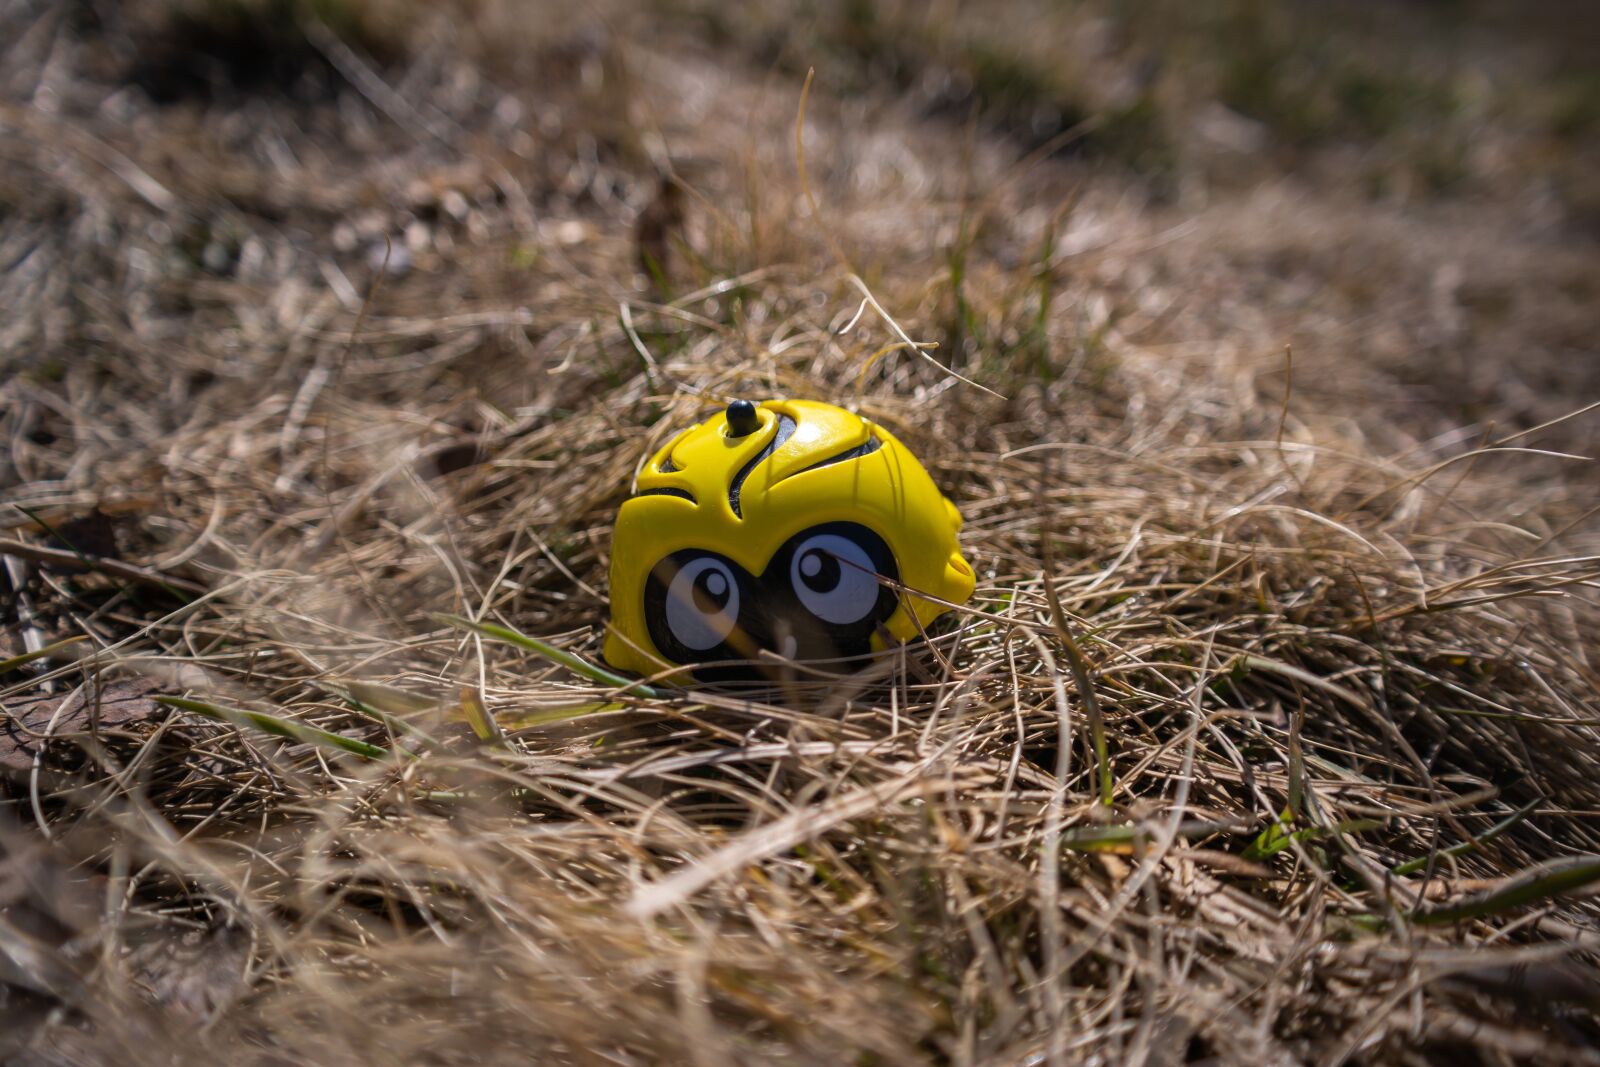 Samsung NX300 sample photo. Grass, toy, spring photography